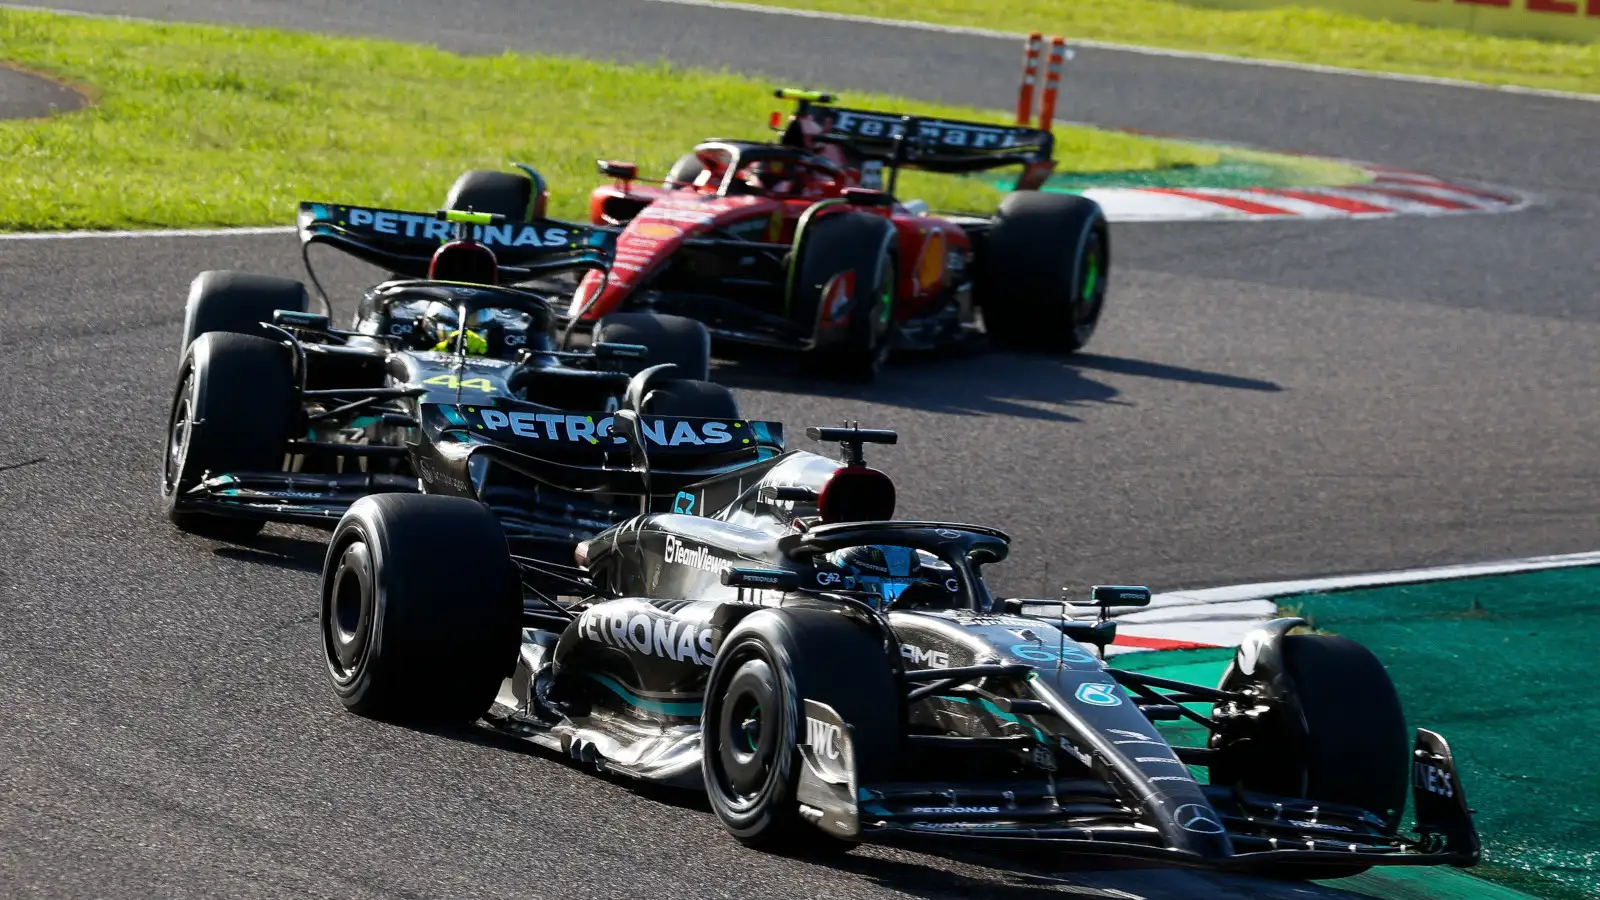 Mercedes driver George Russell leads Lewis Hamilton and Carlos Sainz late in the Japanese Grand Prix.